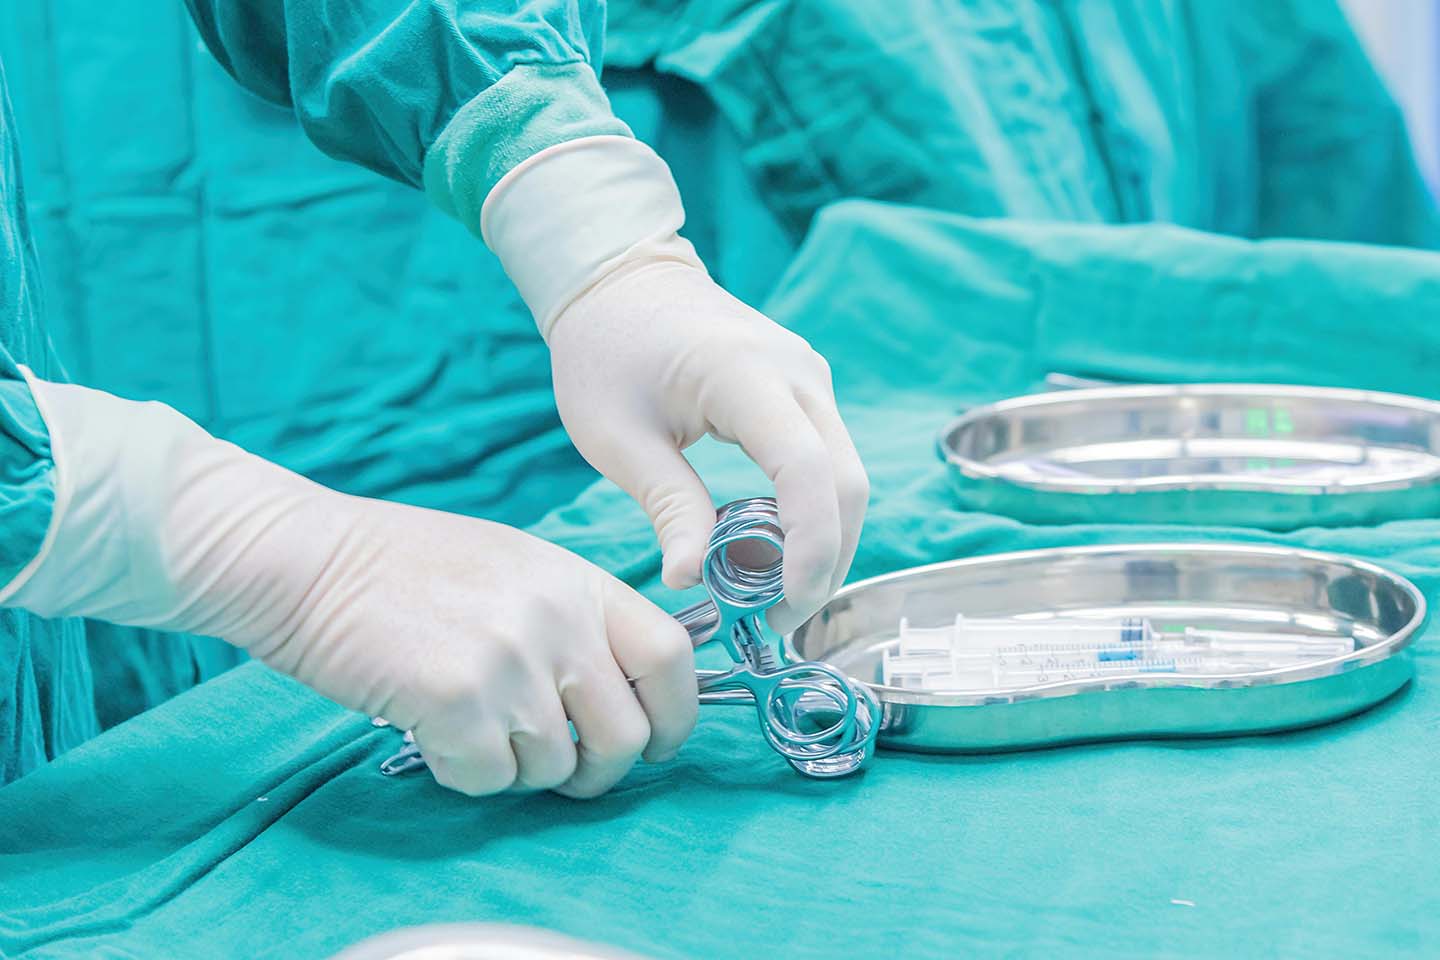 A medical professional wearing white latex surgical gloves while arranging several surgical scissors in the operating table.